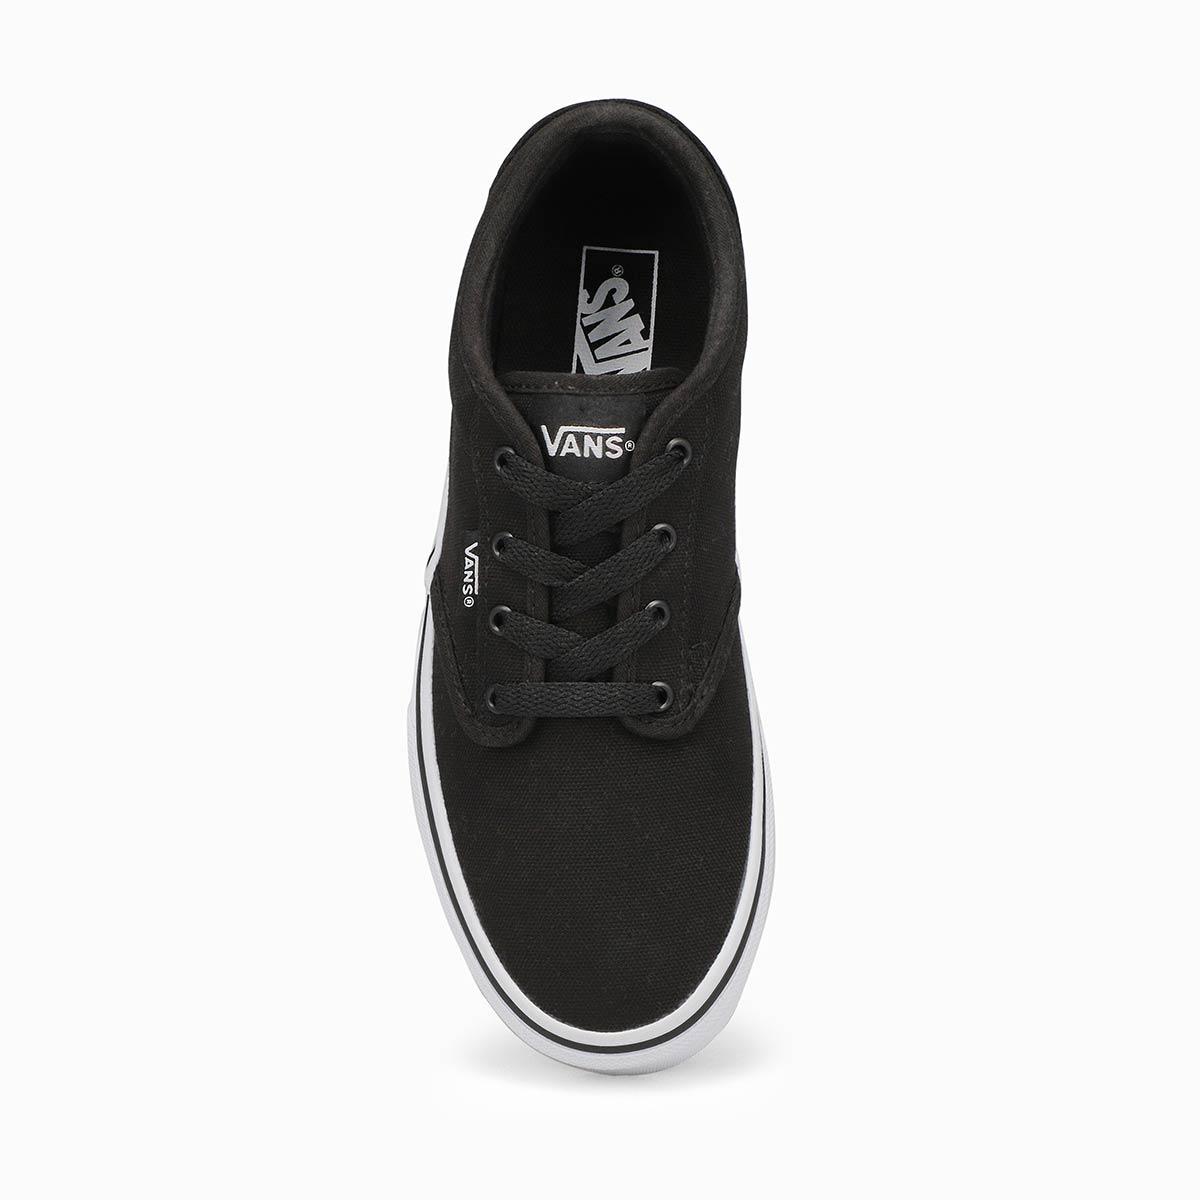 Vans Boys' ATWOOD black/white canvas lace up | SoftMoc.com